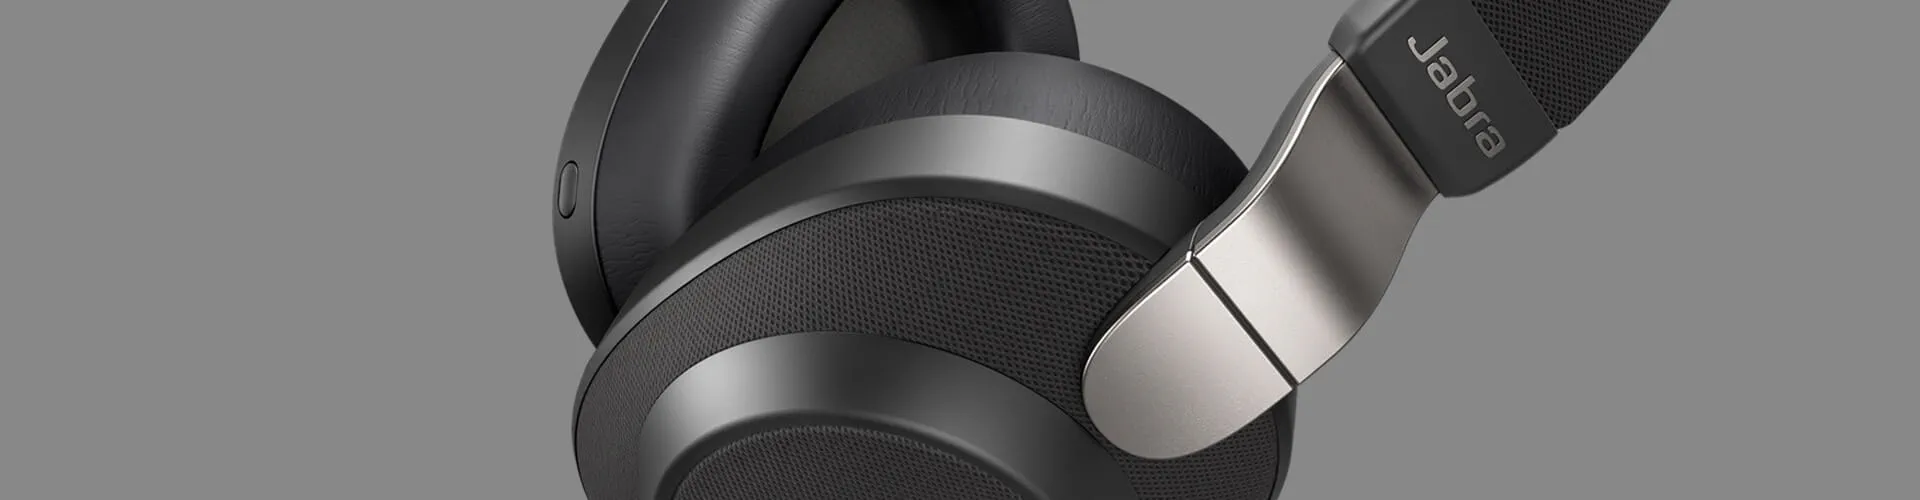 Jabra is reportedly readying new Elite 8 earbuds with premium ANC